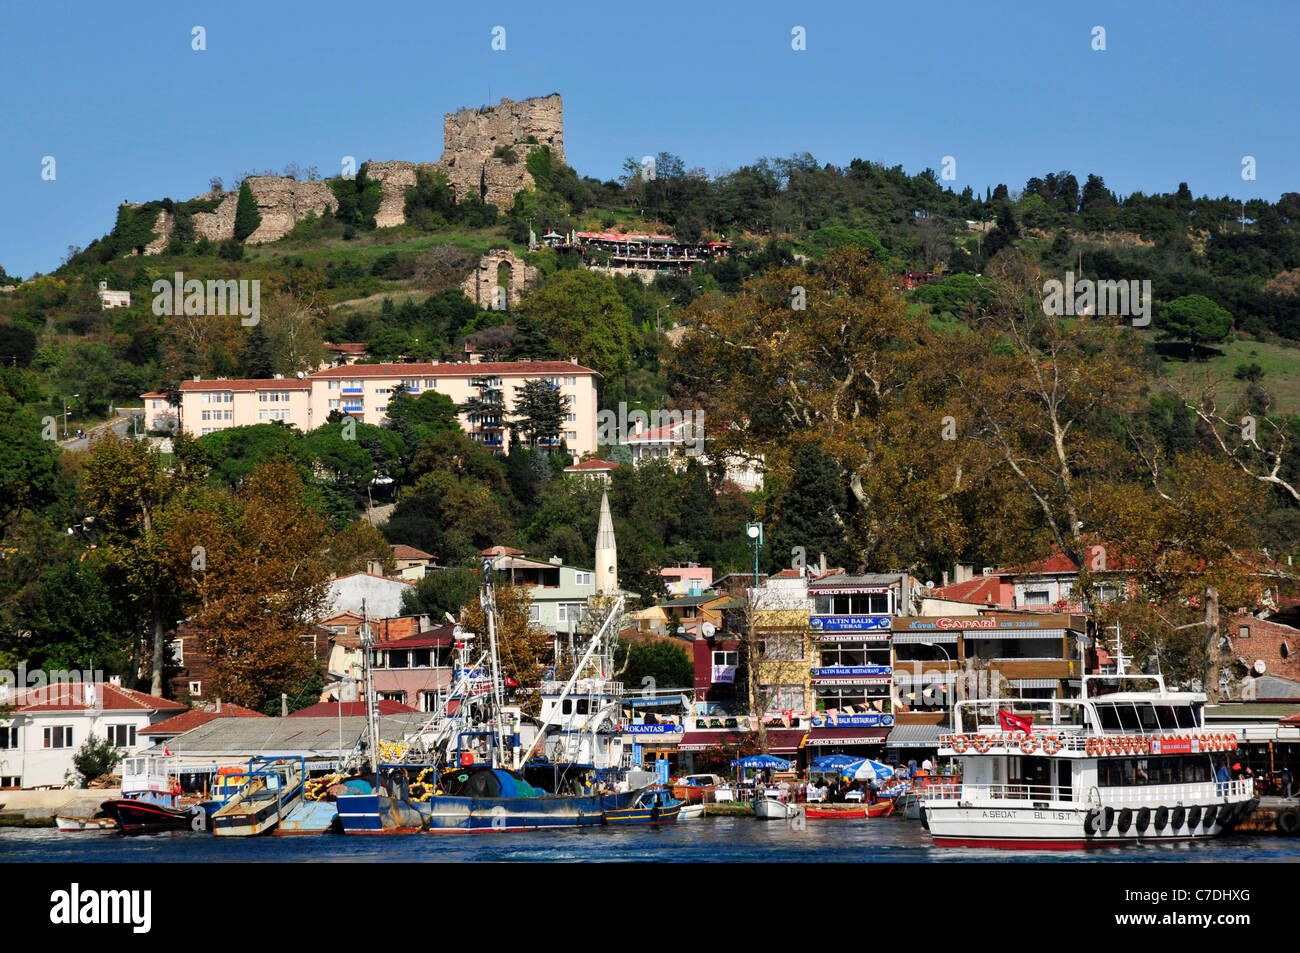 Genovese castle stands above the small fishing and tourist village of Anadolu Kavagi near the Black Sea. The Bosporus Strait. Stock Photo